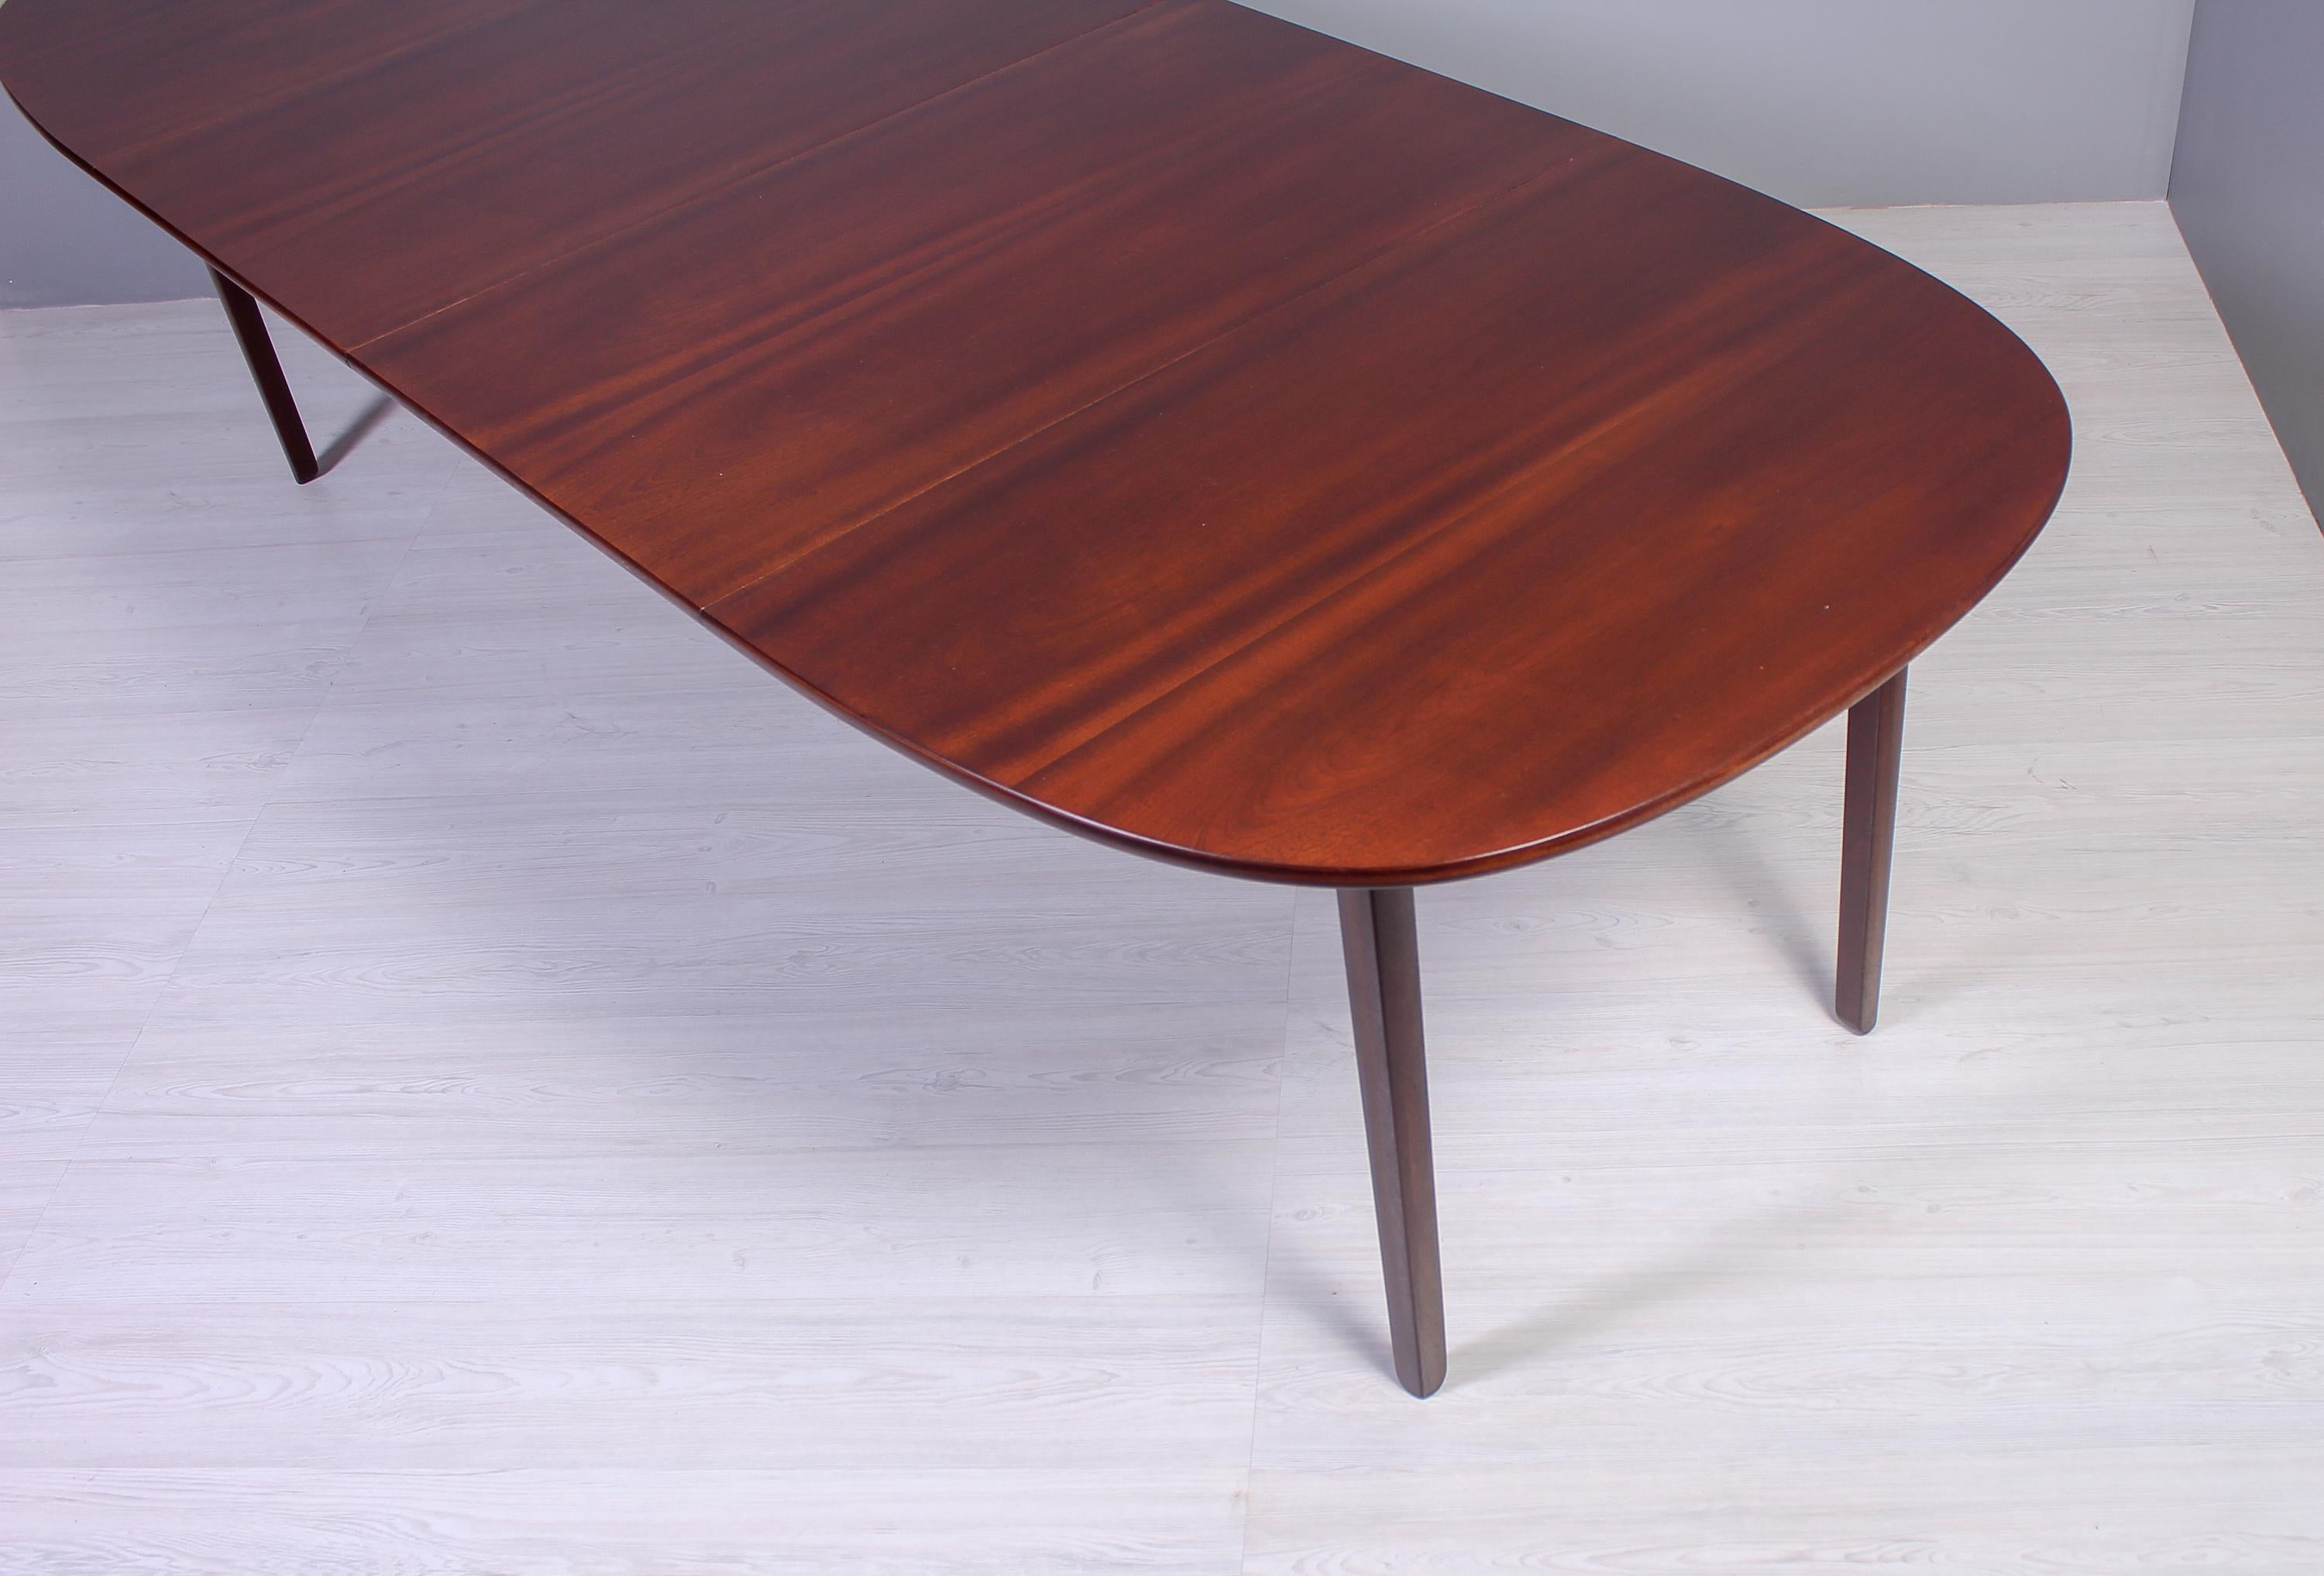 Ole Wanscher Mahogany Rungstedlund Dining Table, 1960s For Sale 4